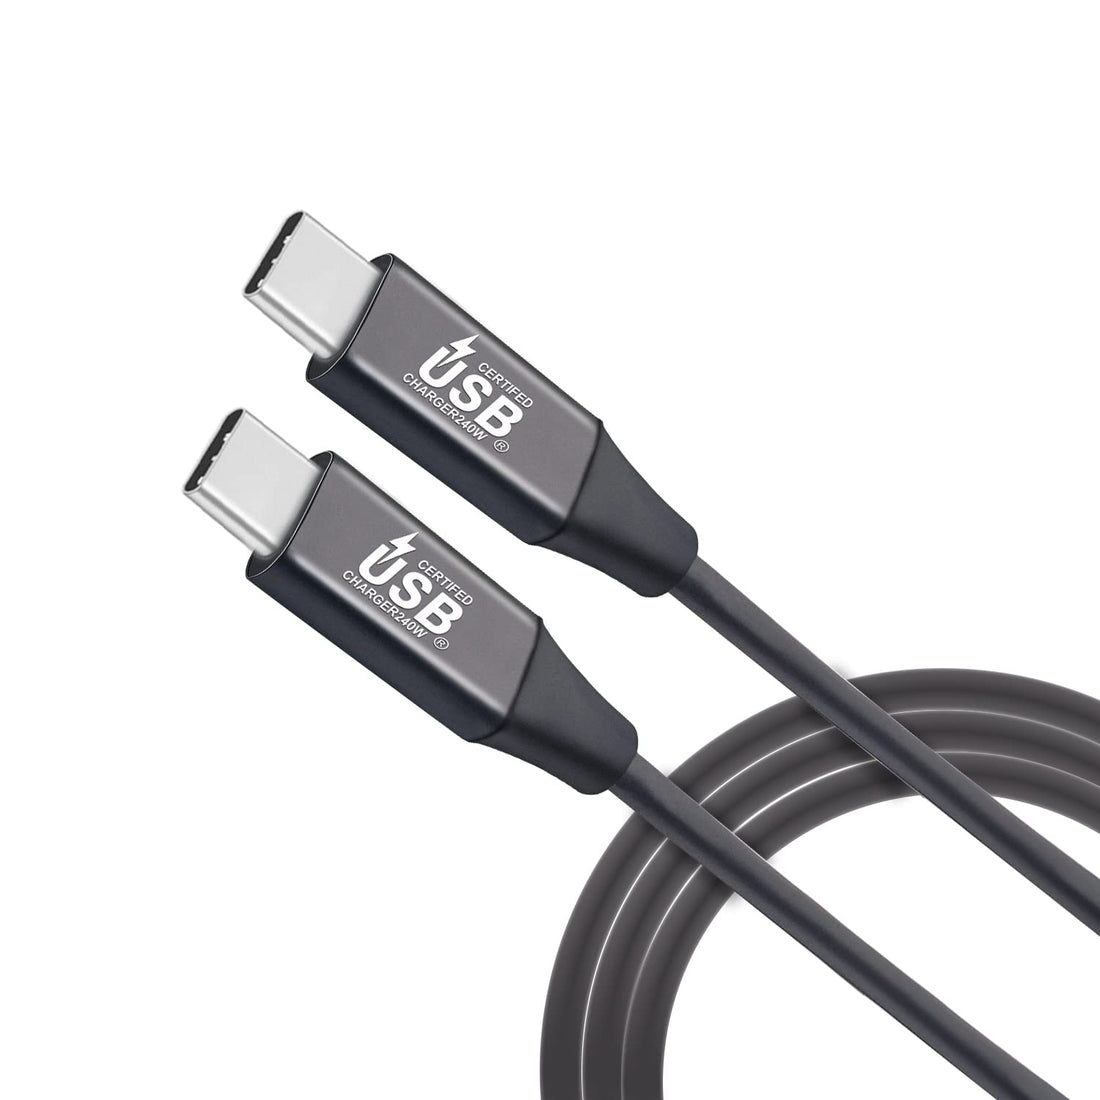 What is 240W PD USB-C cable?